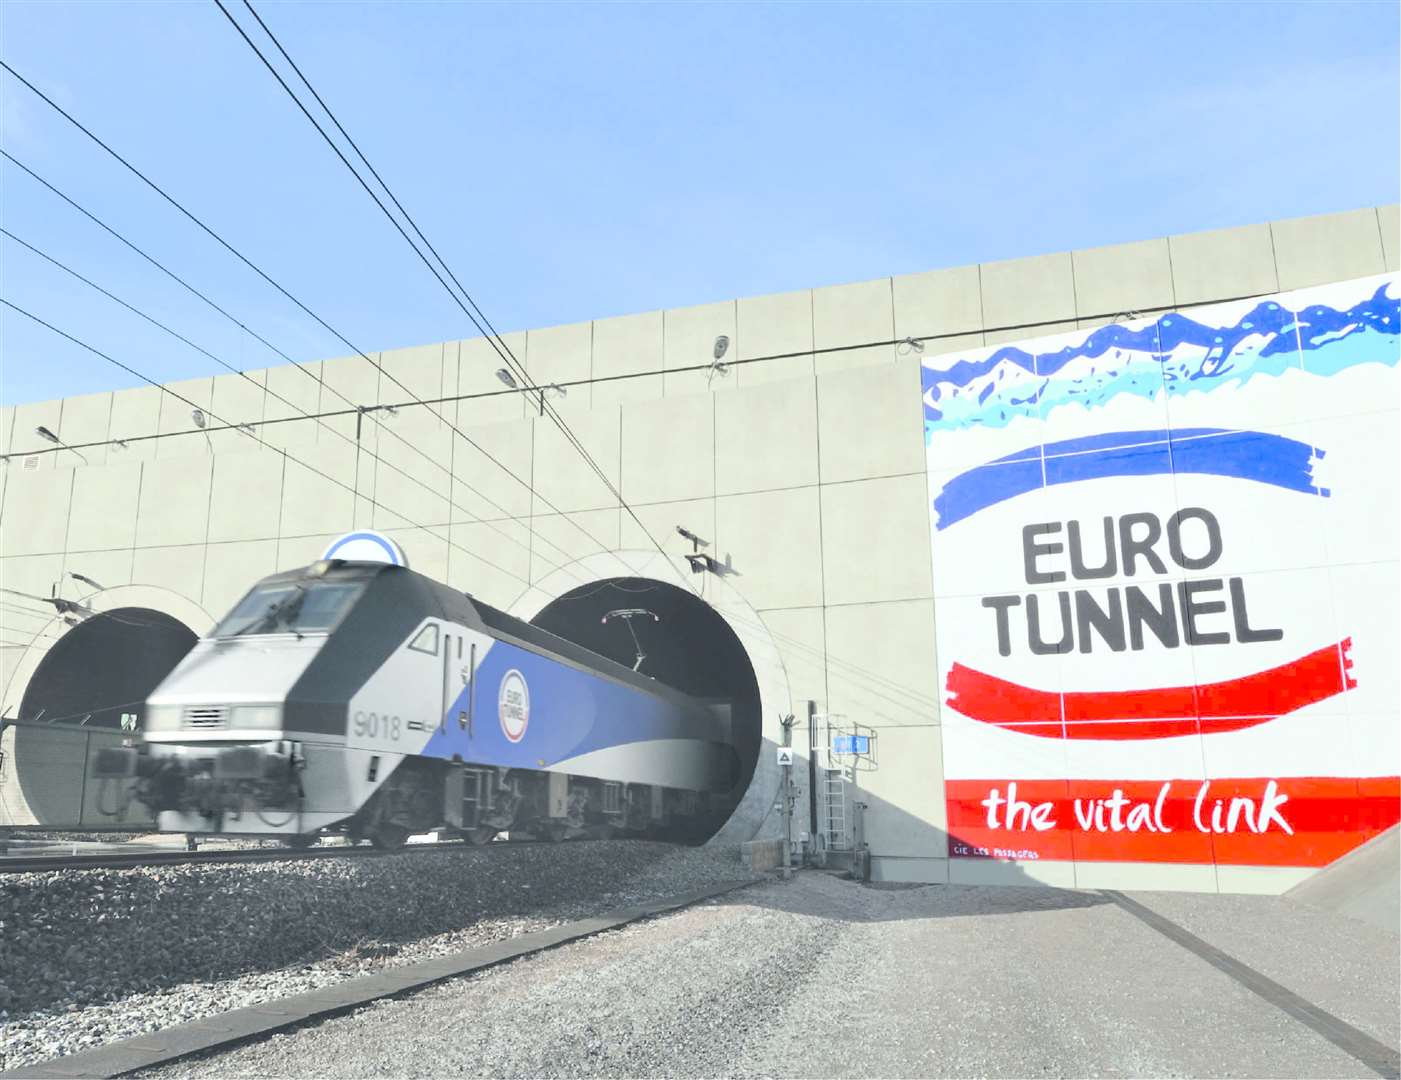 Eurotunnel has seen a health start to the year - but says it remains alert to the 'uncertainties' which could lie ahead.